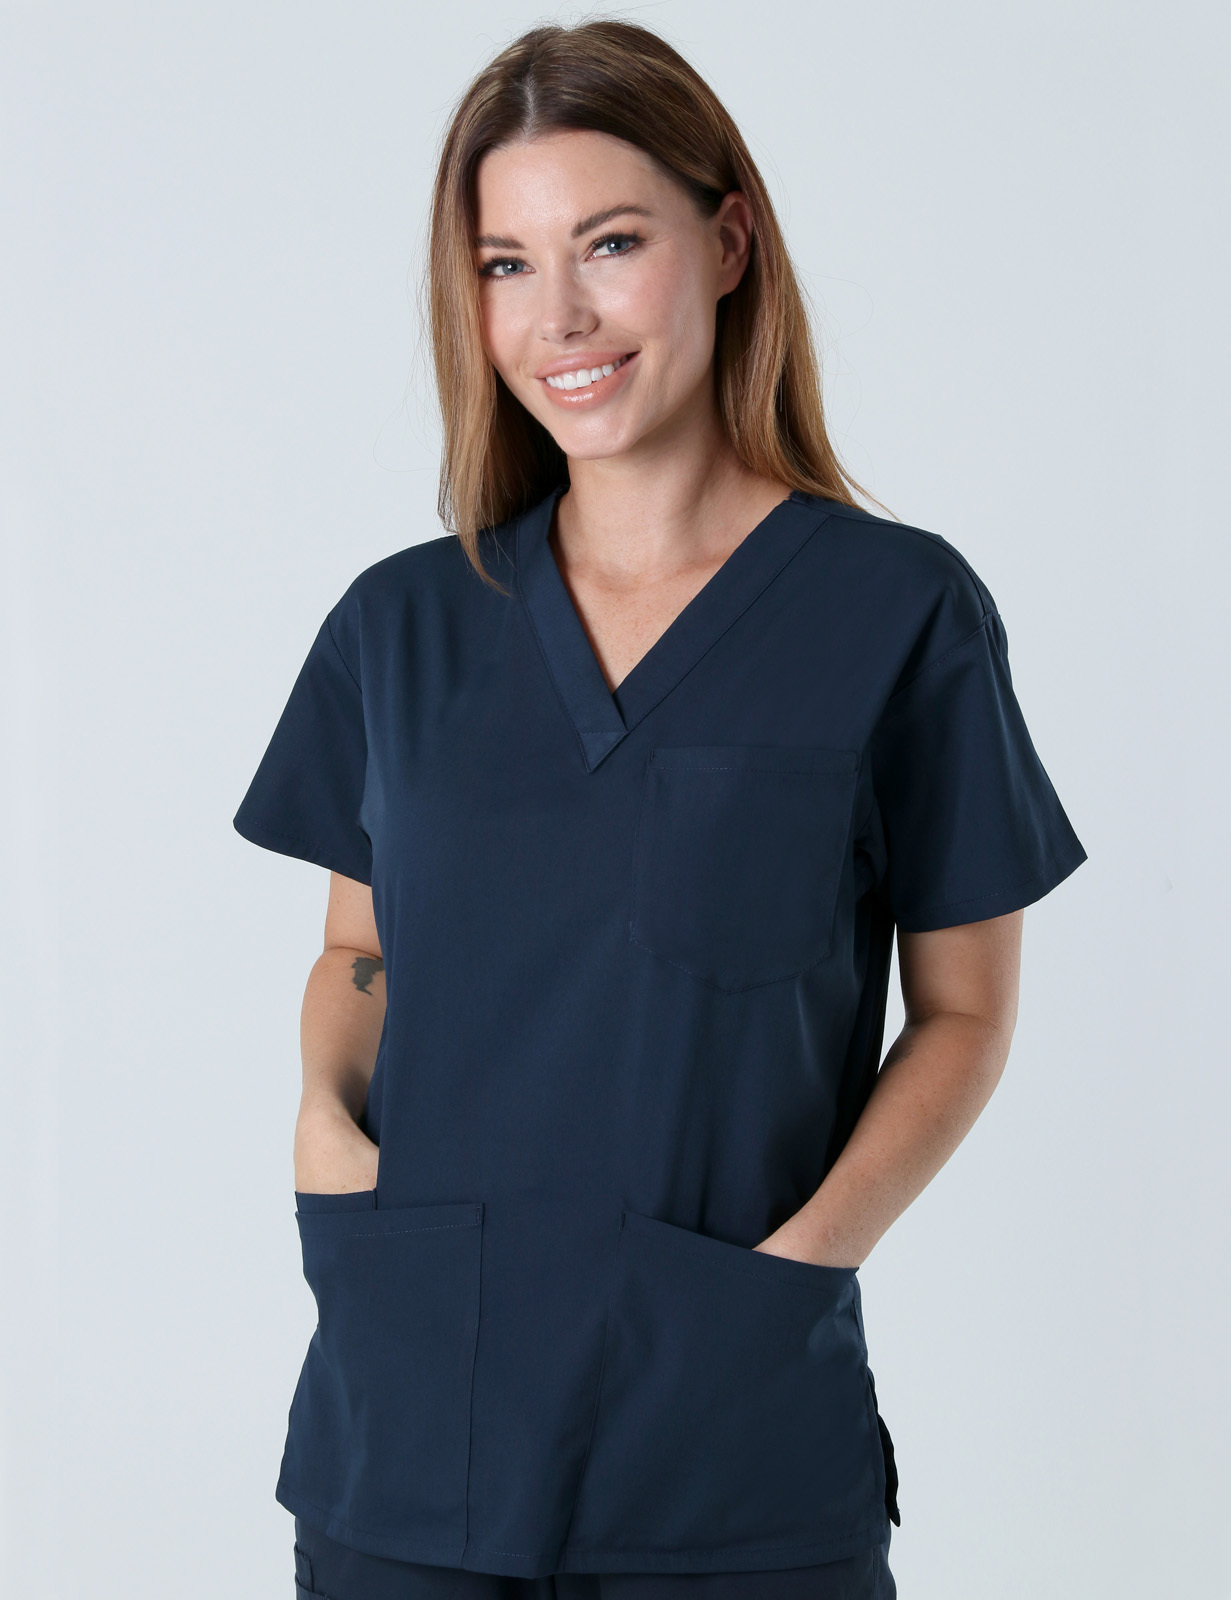 Redcliffe Hospital - ICU (4 Pocket Scrub Top and Cargo Pants in Navy incl Logos)